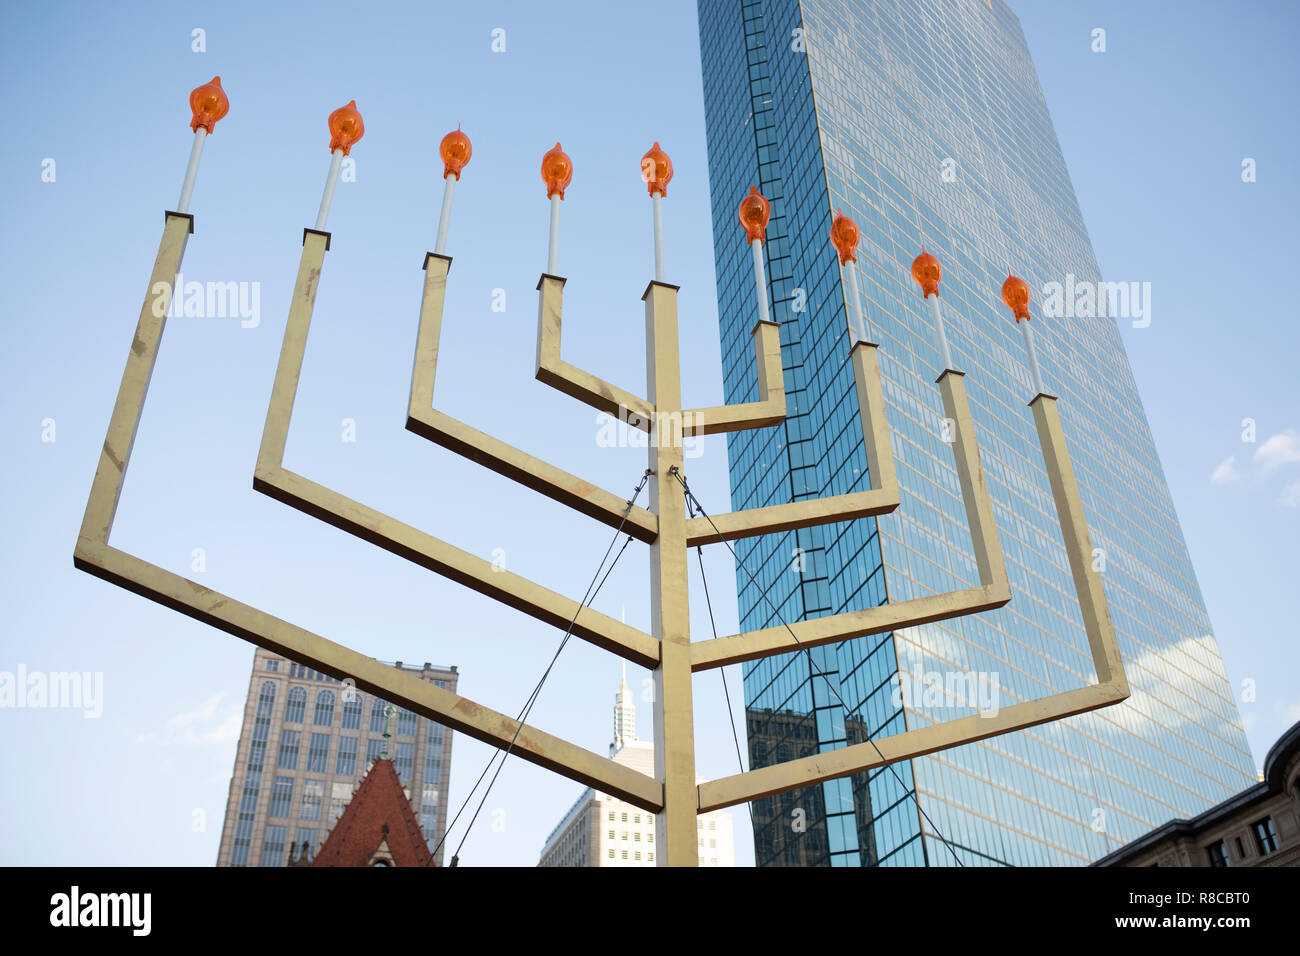 A giant menorah on display for Hanukkah in Copley Plaza in downtown ...